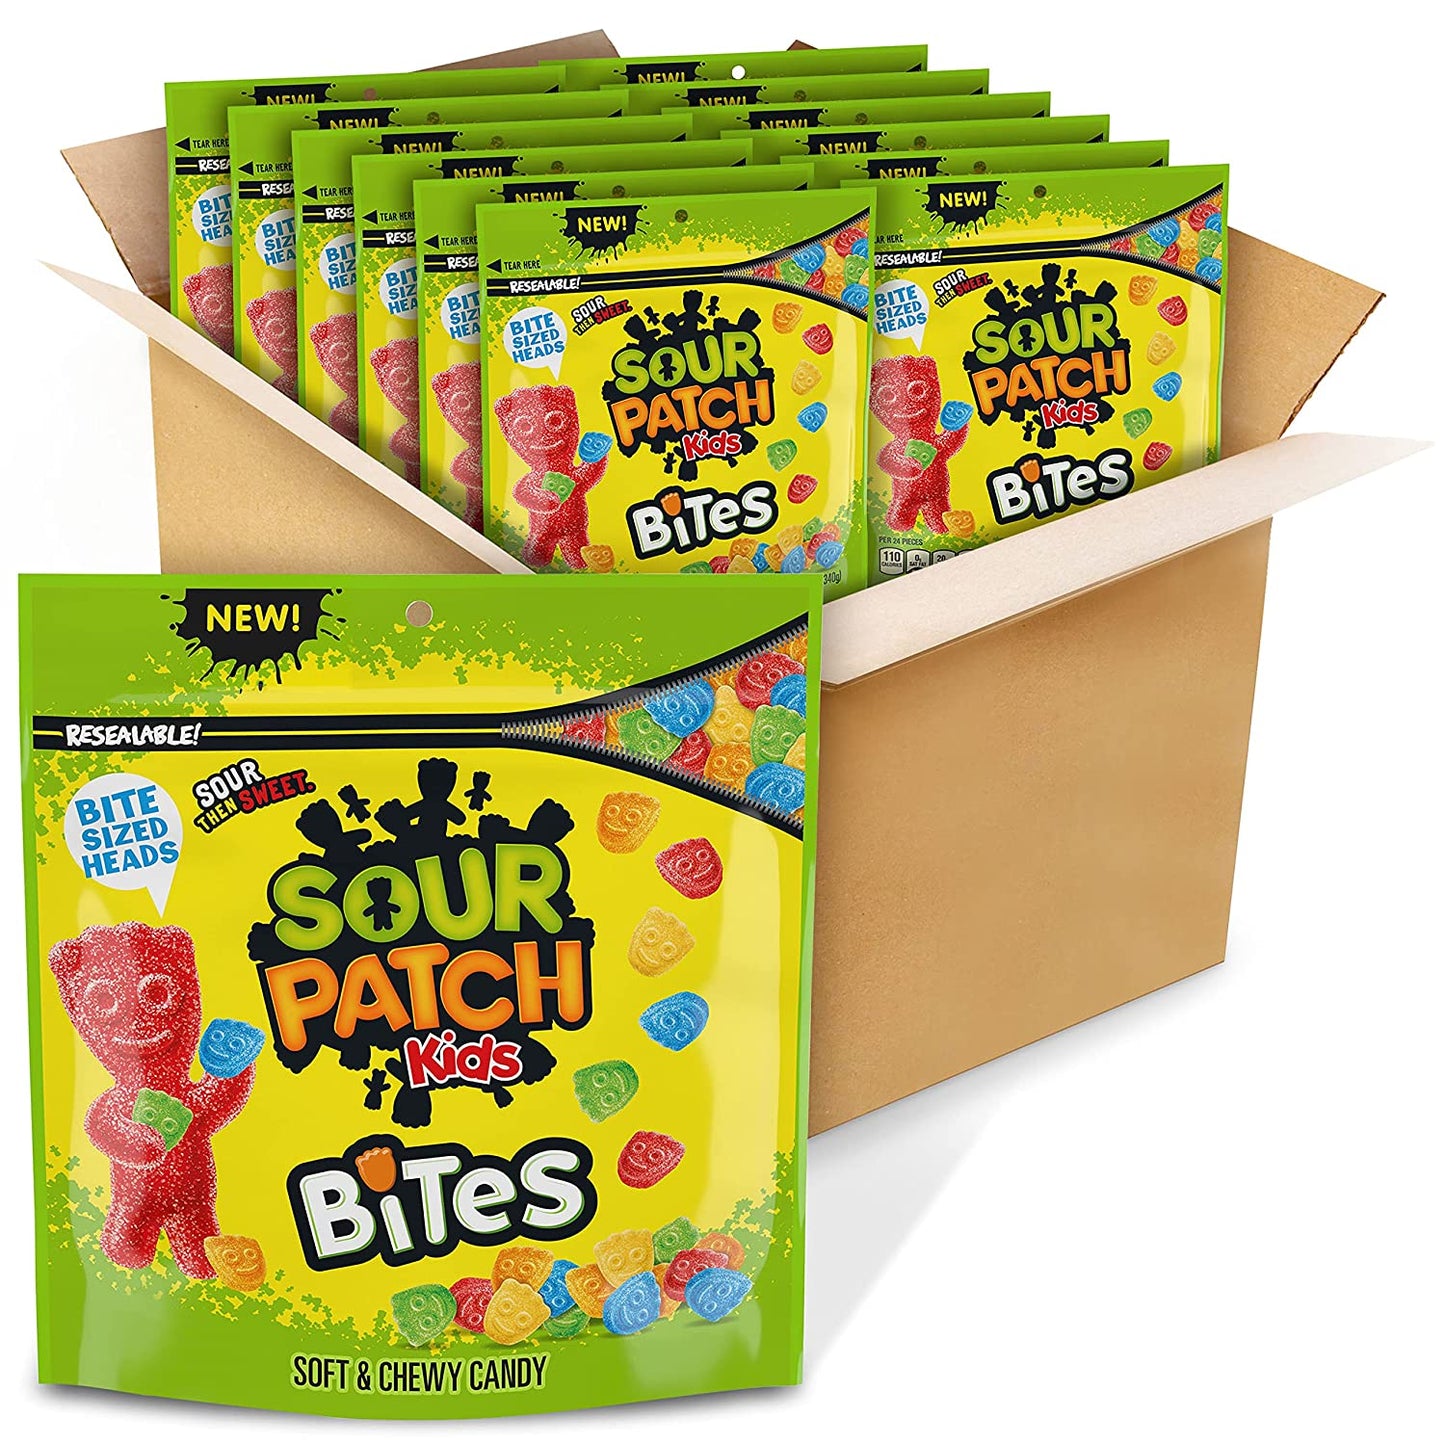 SOUR PATCH KIDS Bites Original Soft & Chewy Candy, 12 Ounce (Pack of 12)